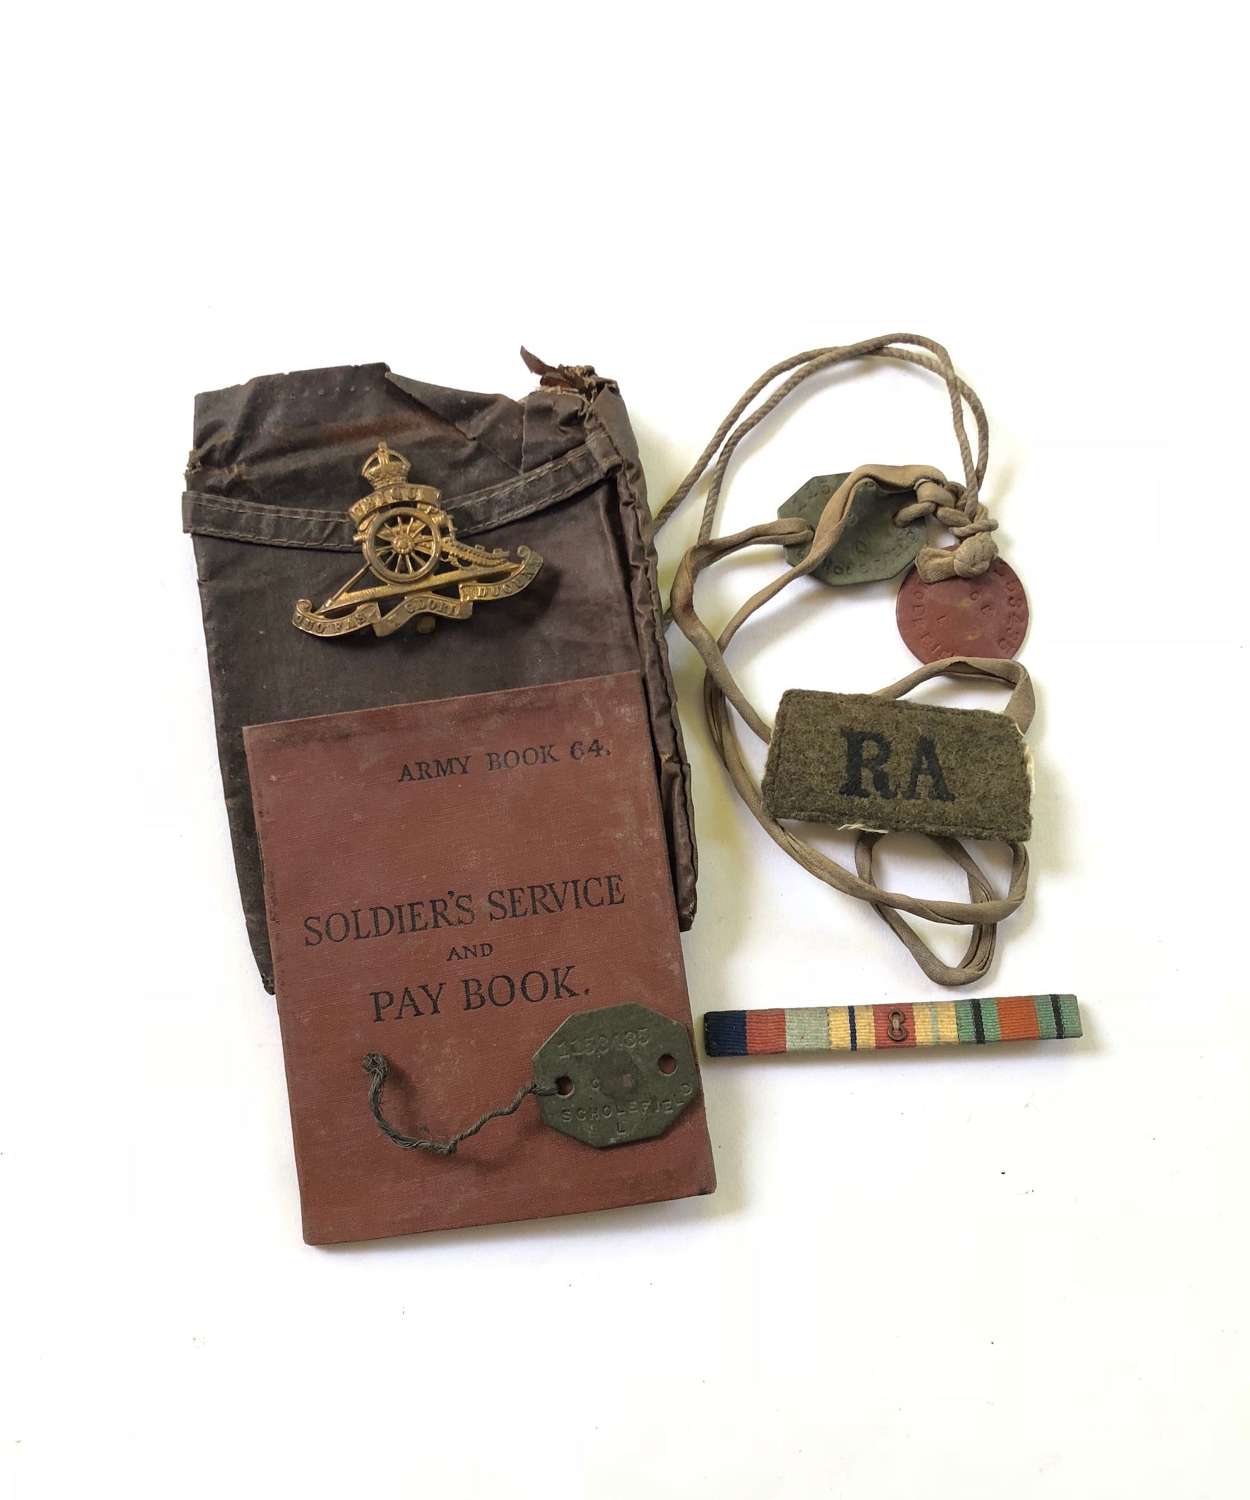 WW2 Royal Artillery Badges, Pay Book ID Tags Etc.